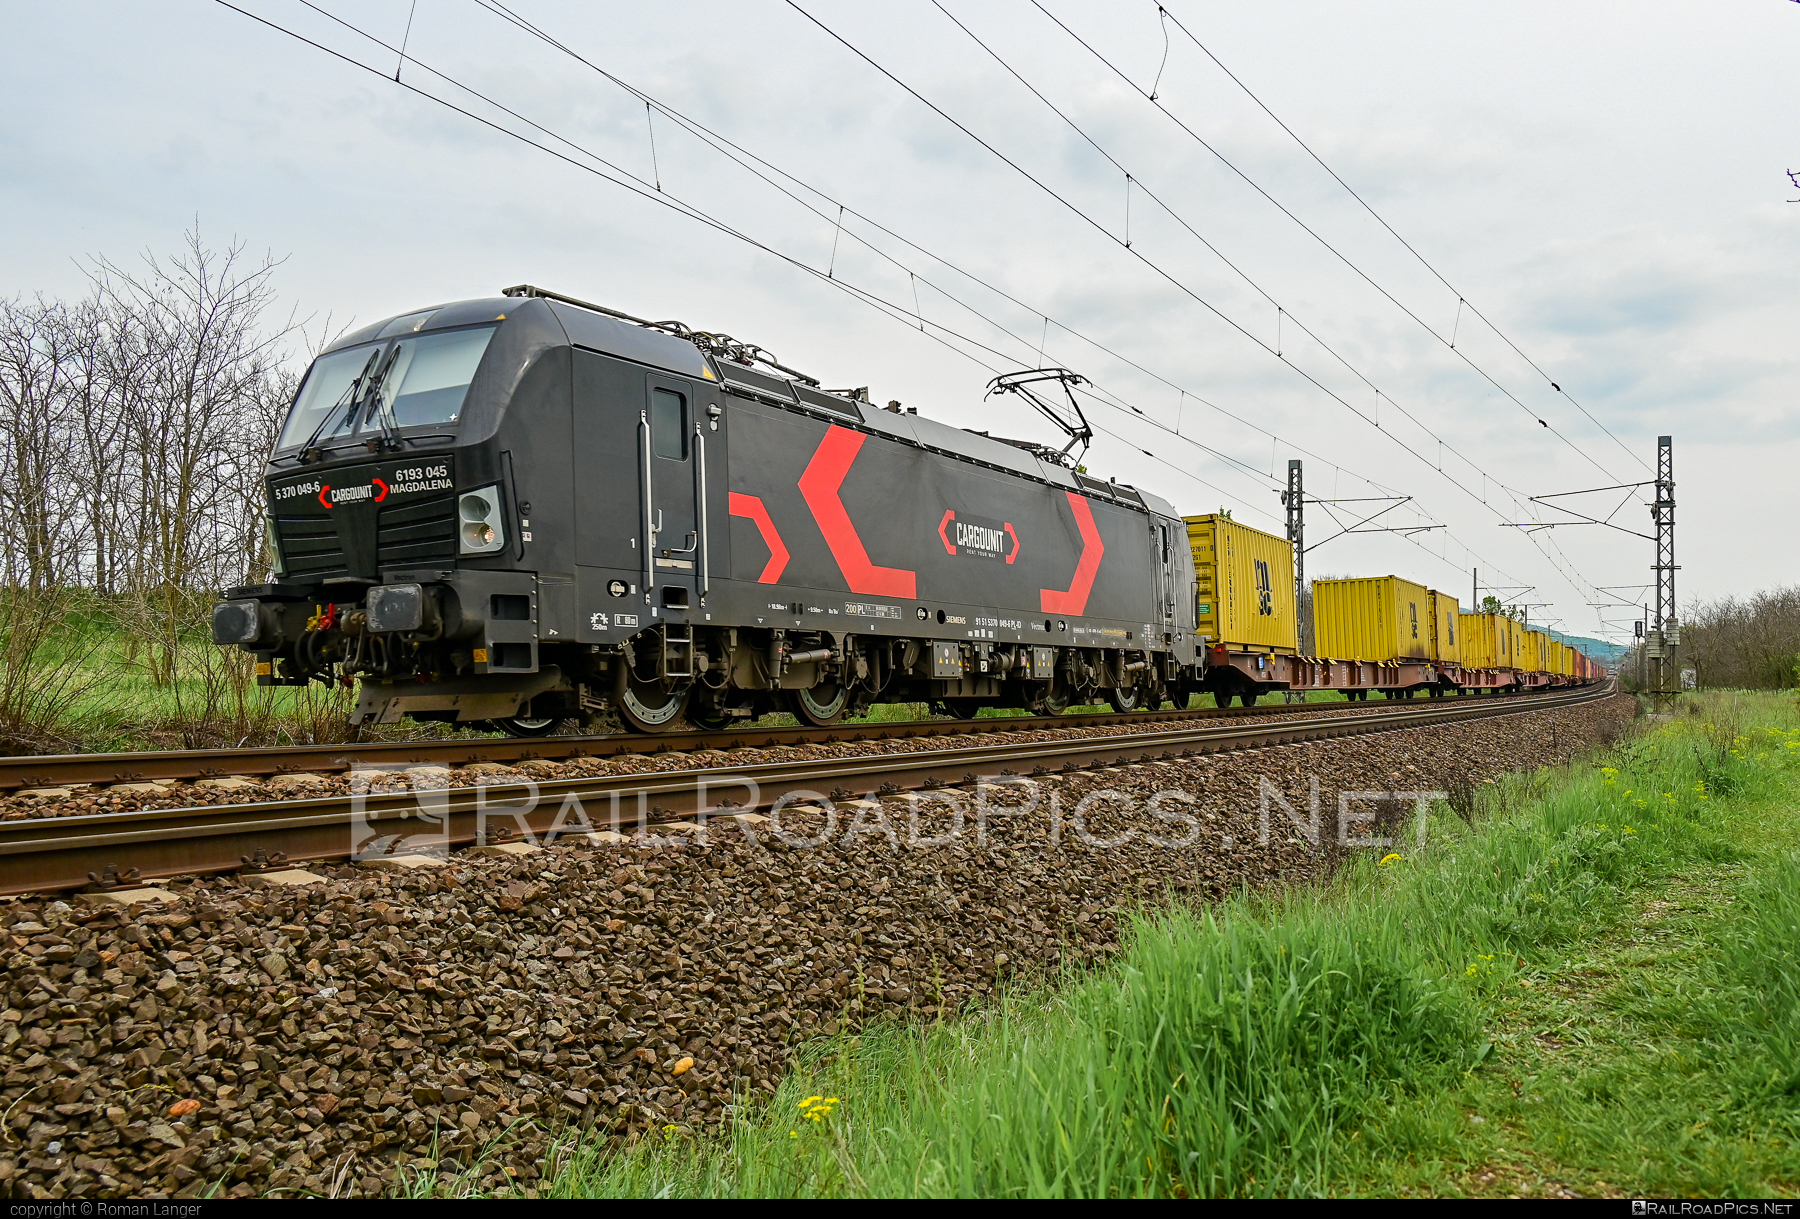 Siemens Vectron MS - 5 370 049-6 operated by METRANS (Danubia) a.s. #IndustrialDivision #cargounit #container #flatwagon #hhla #metrans #metransdanubia #msc #siemens #siemensVectron #siemensVectronMS #vectron #vectronMS